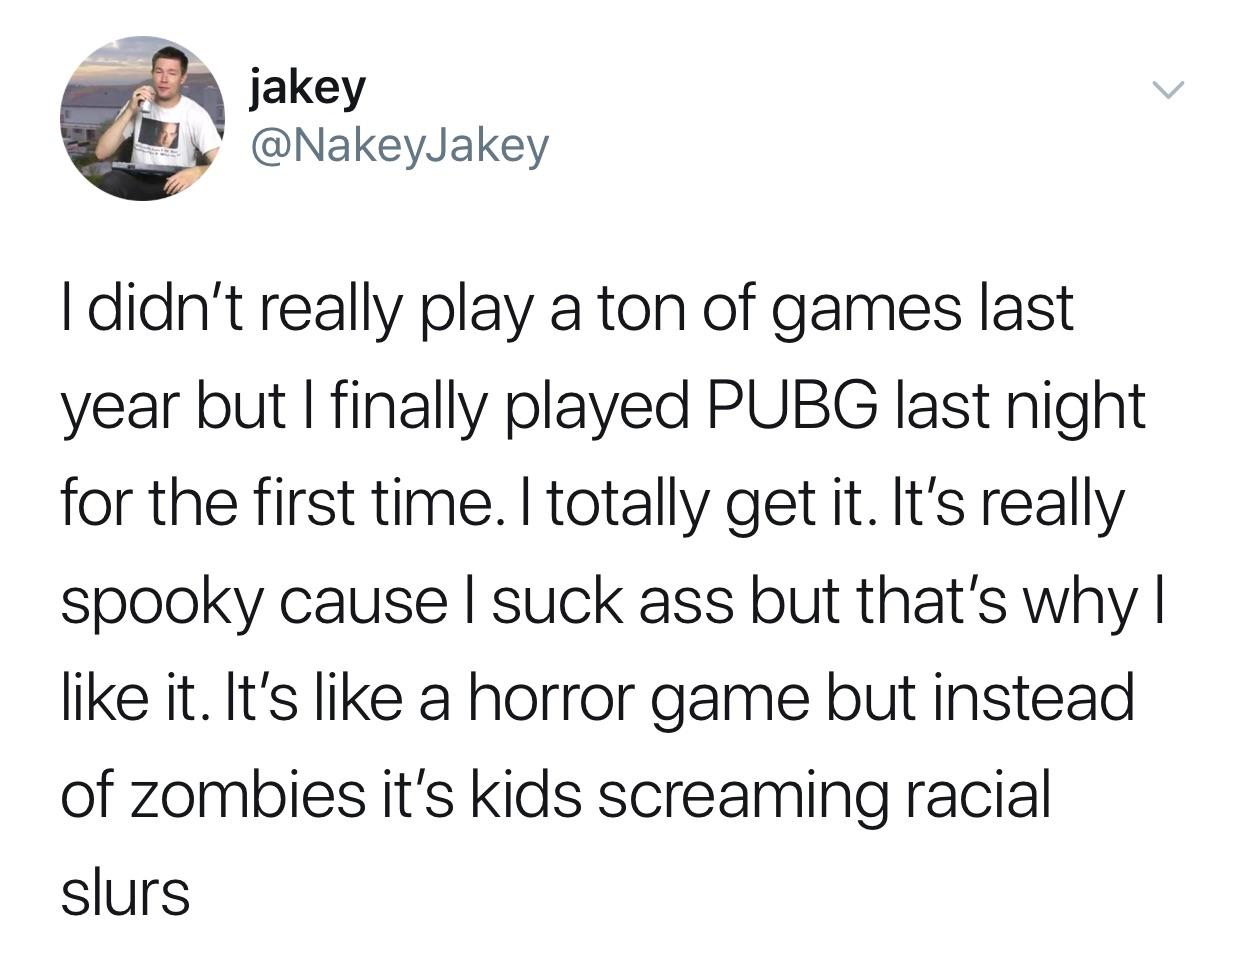 angle - jakey jakey I didn't really play a ton of games last year but I finally played Pubg last night for the first time. I totally get it. It's really spooky cause I suck ass but that's why|| it. It's a horror game but instead of zombies it's kids screa